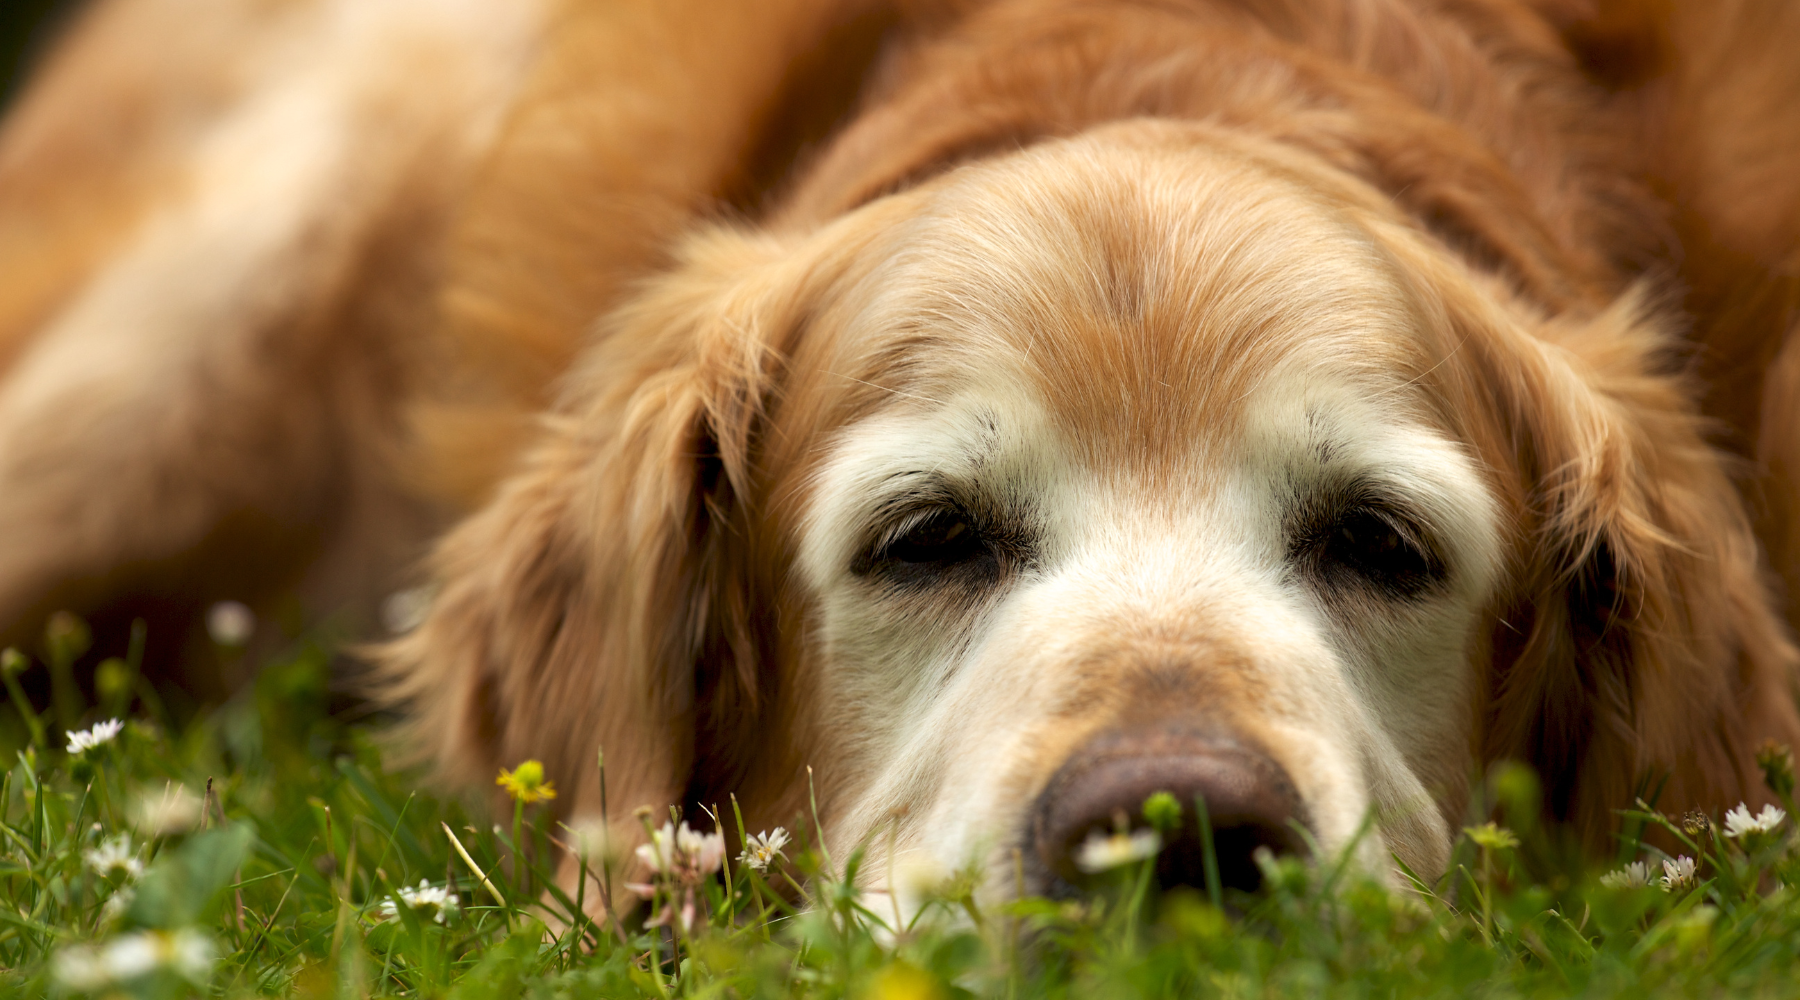 Caring for Aging Pets: A Loving Journey of Health, Comfort, and Companionship